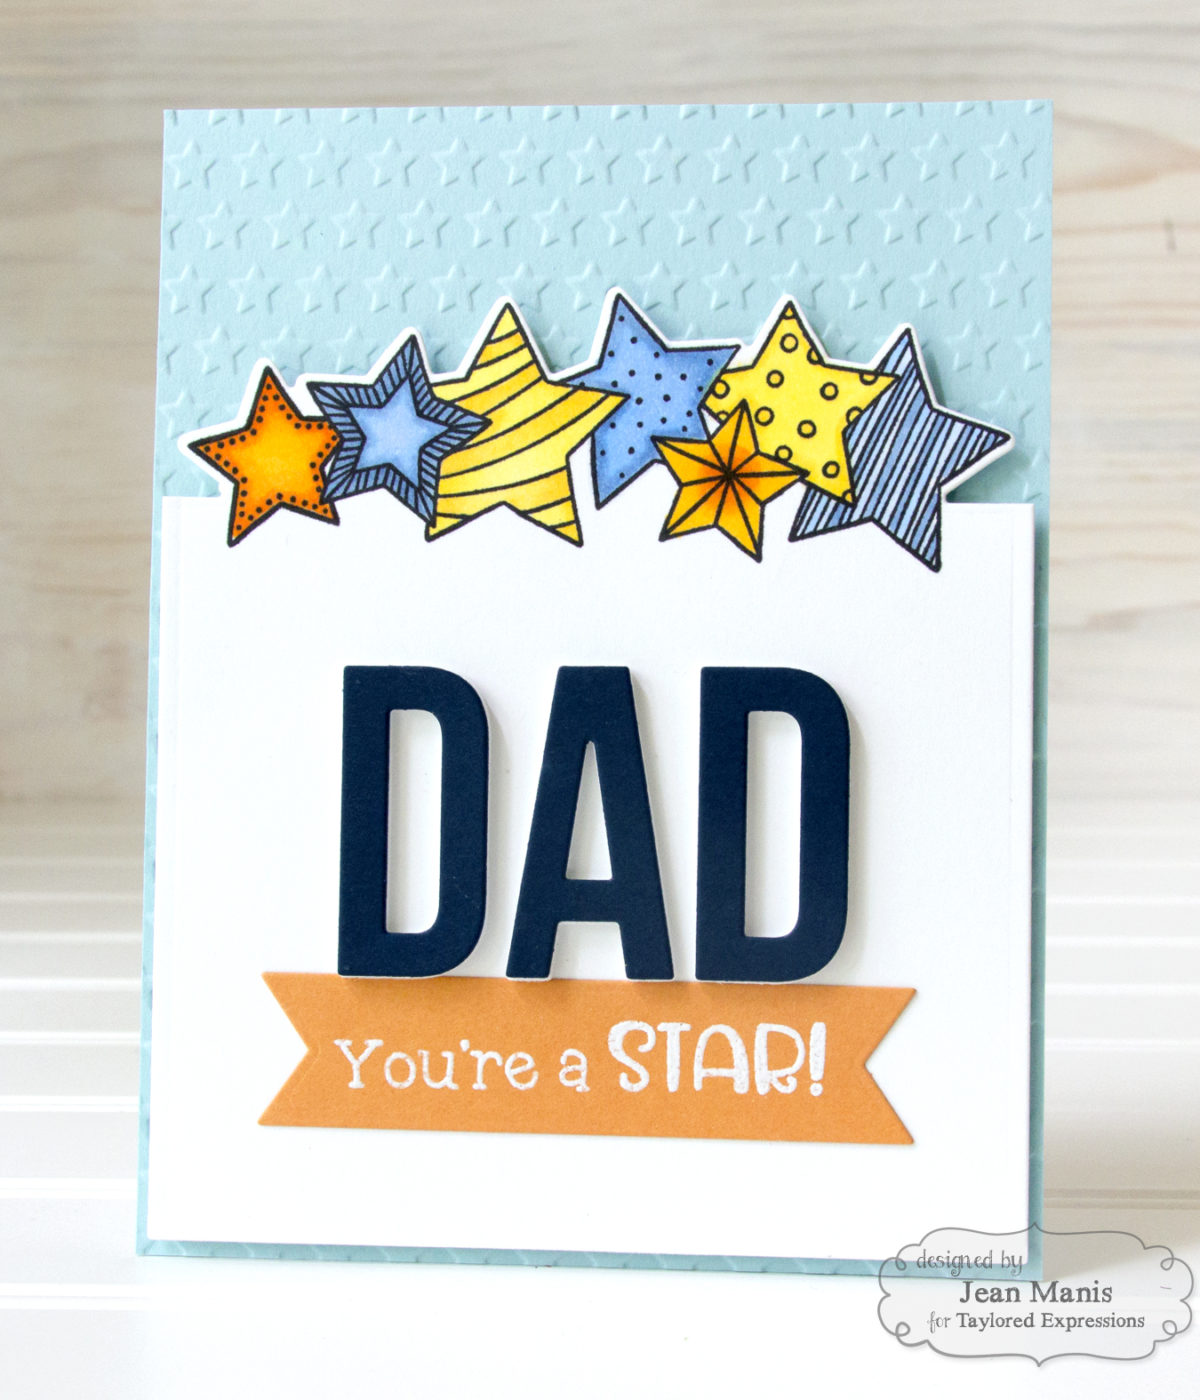 Taylored Expressions – Happy Father’s Day